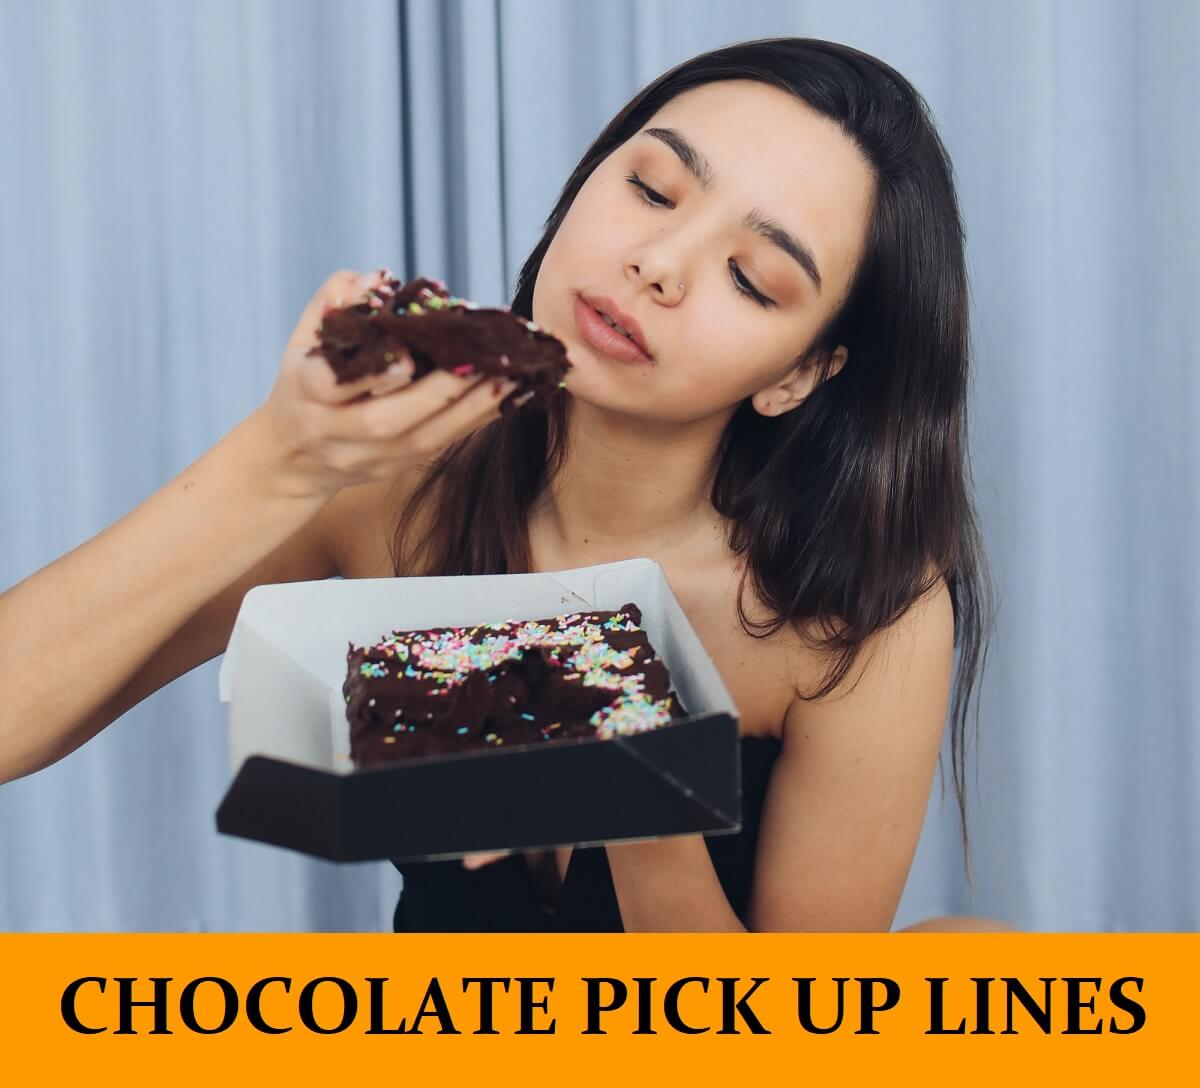 Top 50 Chocolate Pick Up Lines to Impress Your Date!